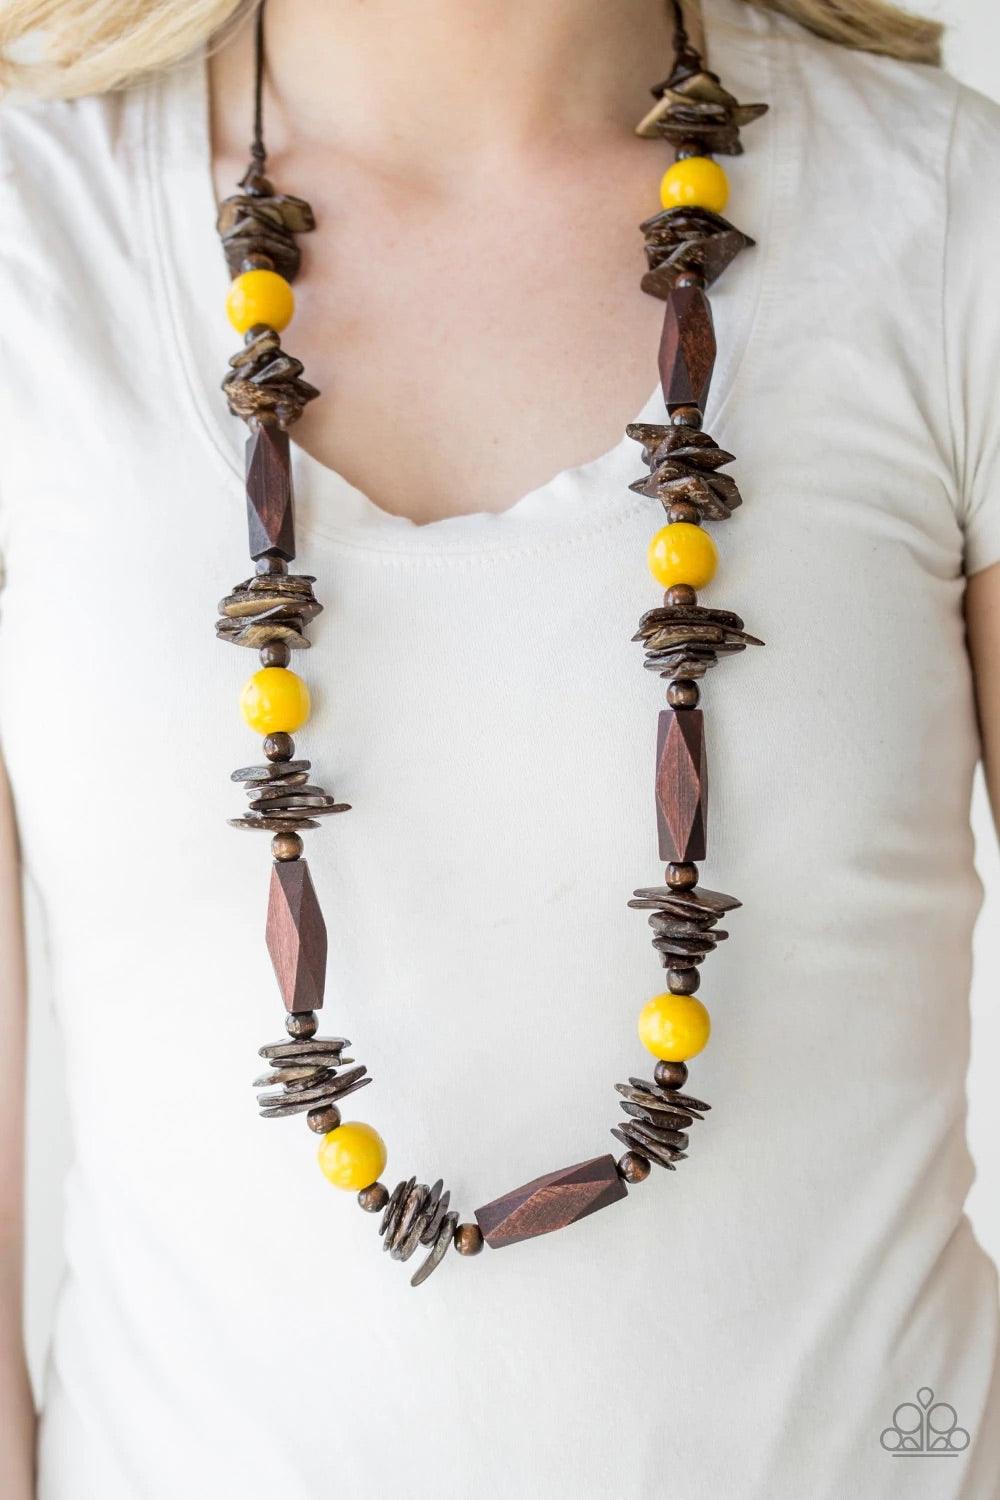 Paparazzi Accessories Cozumel Coast - Yellow Featuring round, faceted, and distressed finishes, mismatched brown wooden beads are threaded along shiny brown cording. Vivacious yellow wooden beads trickle between the earthy accents, adding a colorful finis